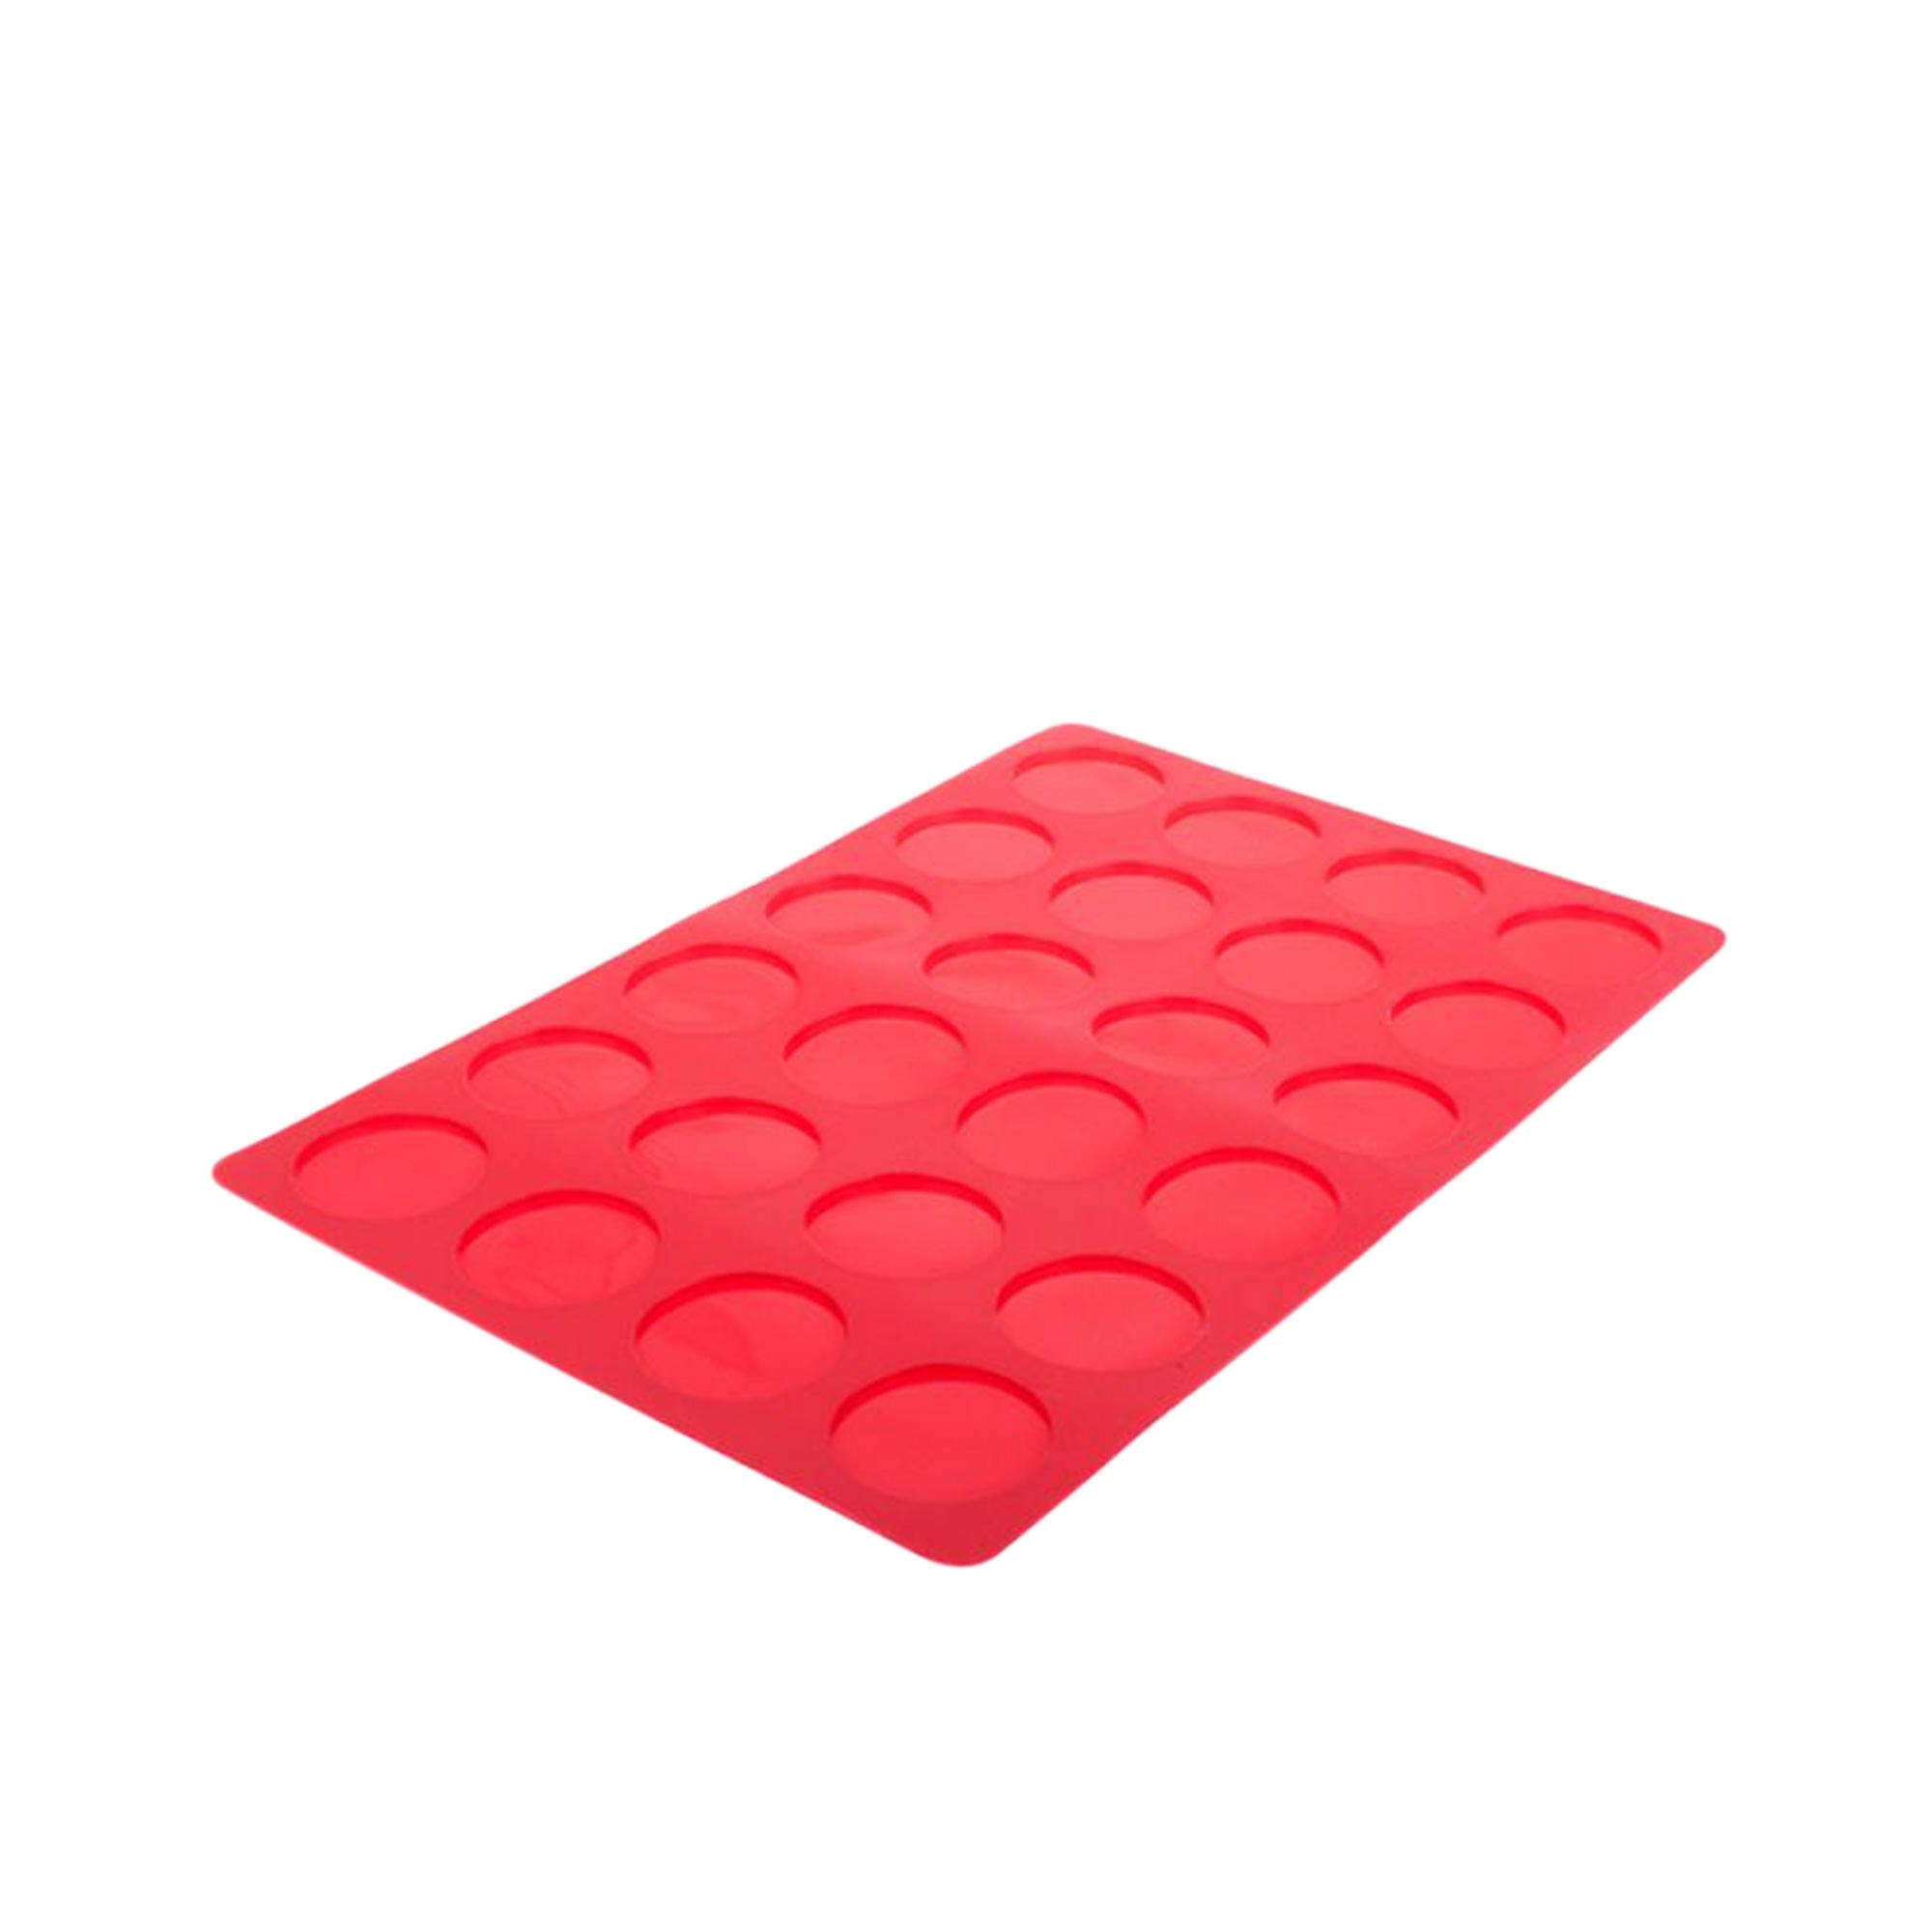 Daily Bake Silicone Macaron Sheet 24 Cup Red Image 2